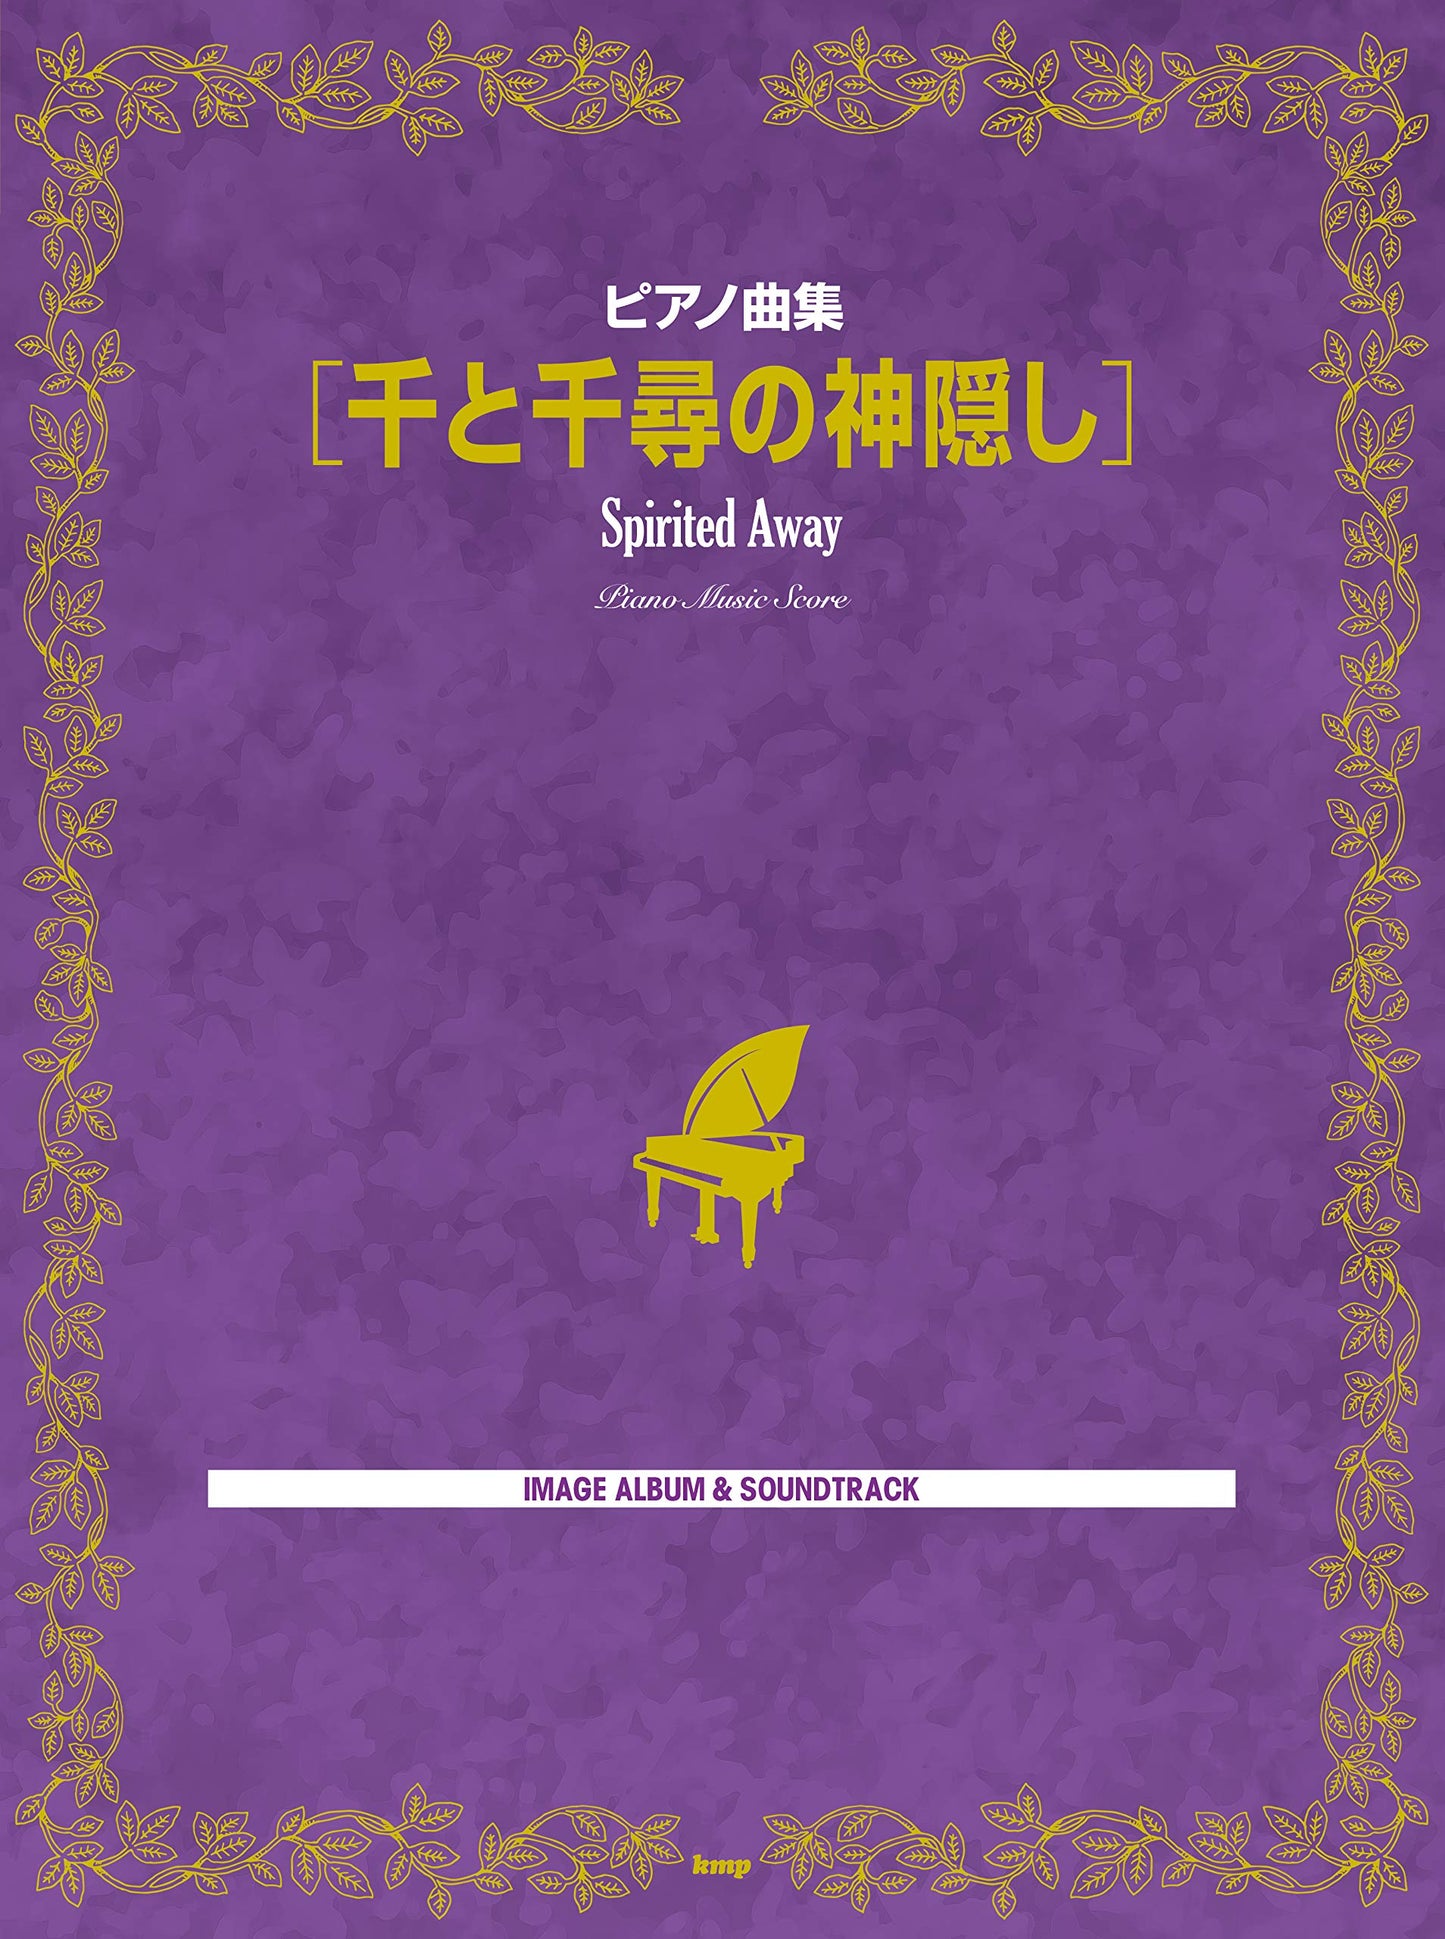 The collection of Spirited Away songs for Piano Solo